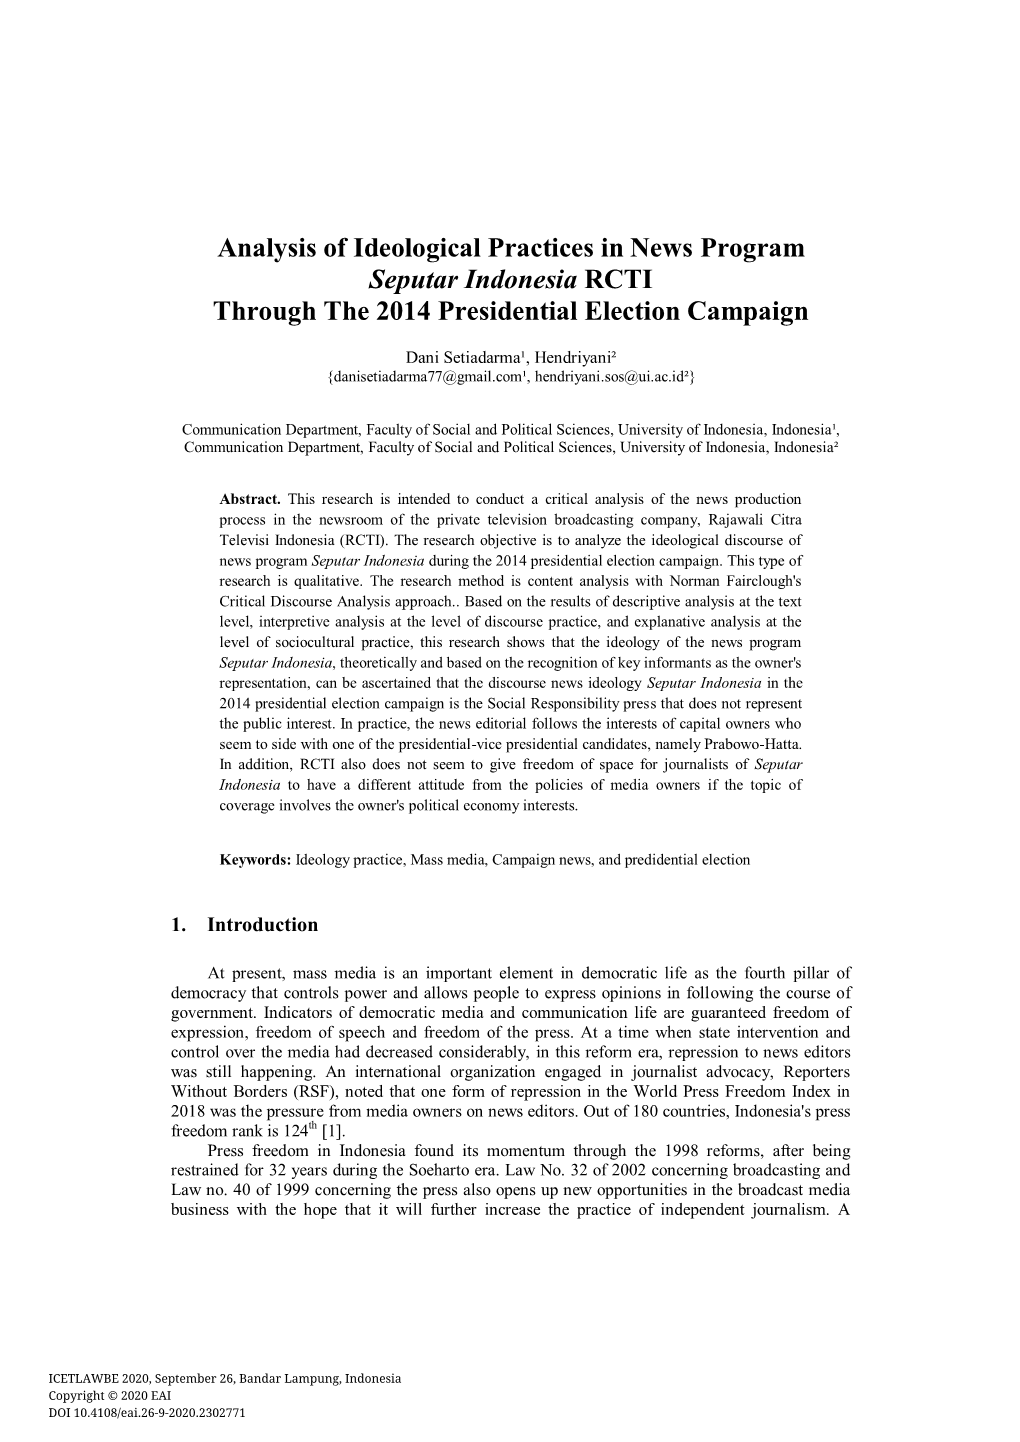 Analysis of Ideological Practices in News Program Seputar Indonesia RCTI Through the 2014 Presidential Election Campaign